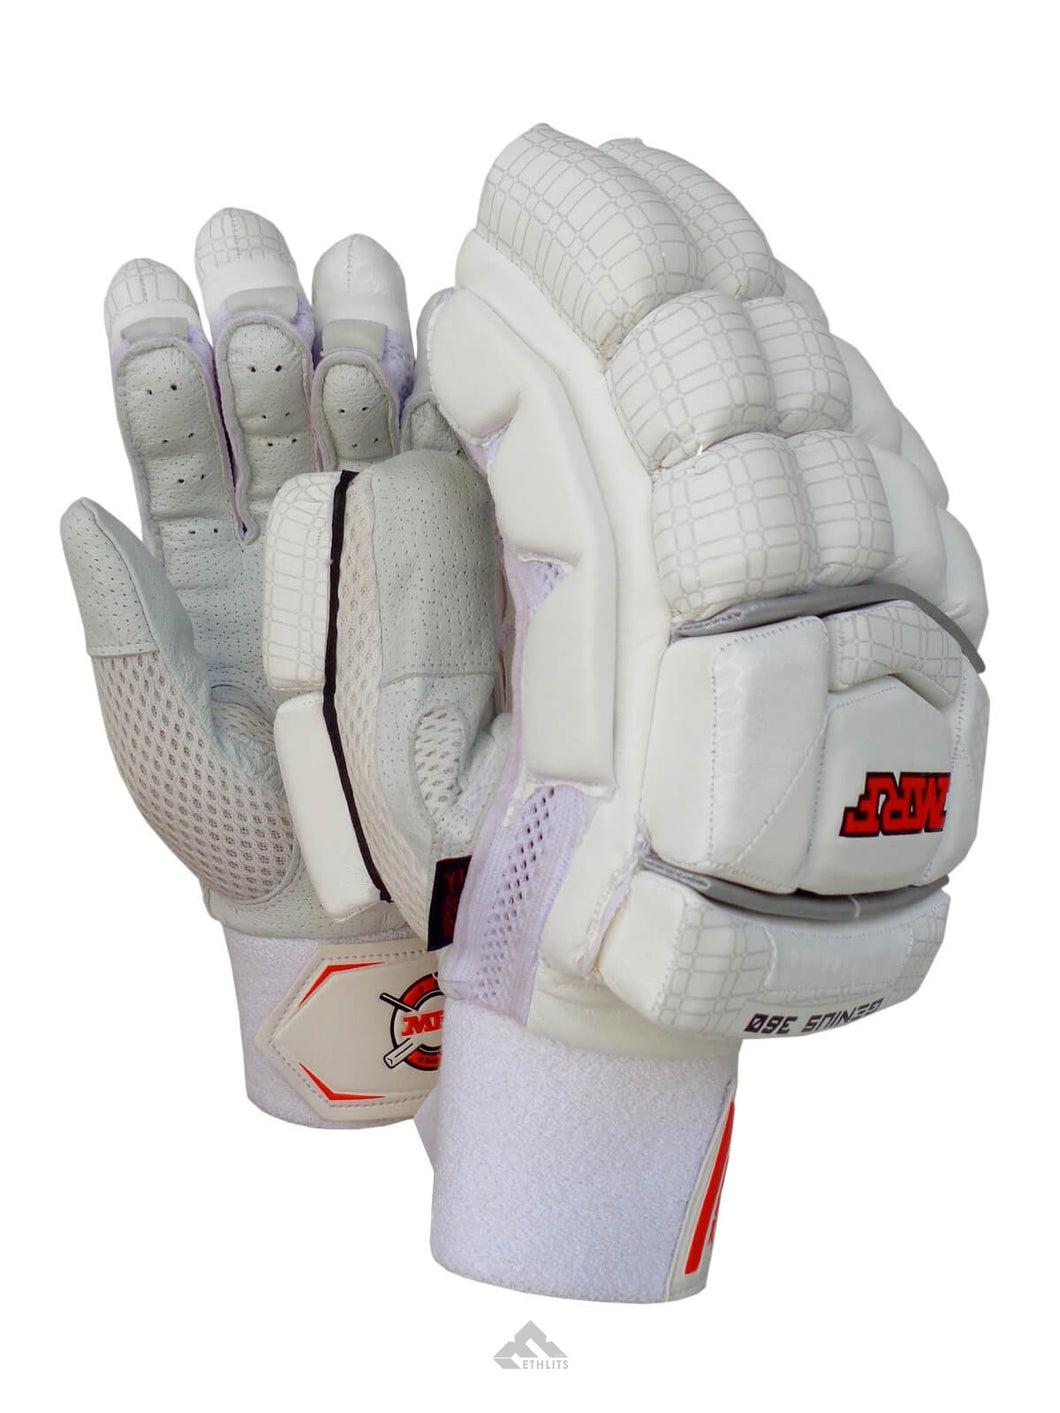 MRF Genius 360 Cricket Batting Gloves On Sale for $59.99 , Free Shipping above $50 GLOVE - BATTING now available at StarSportsUS